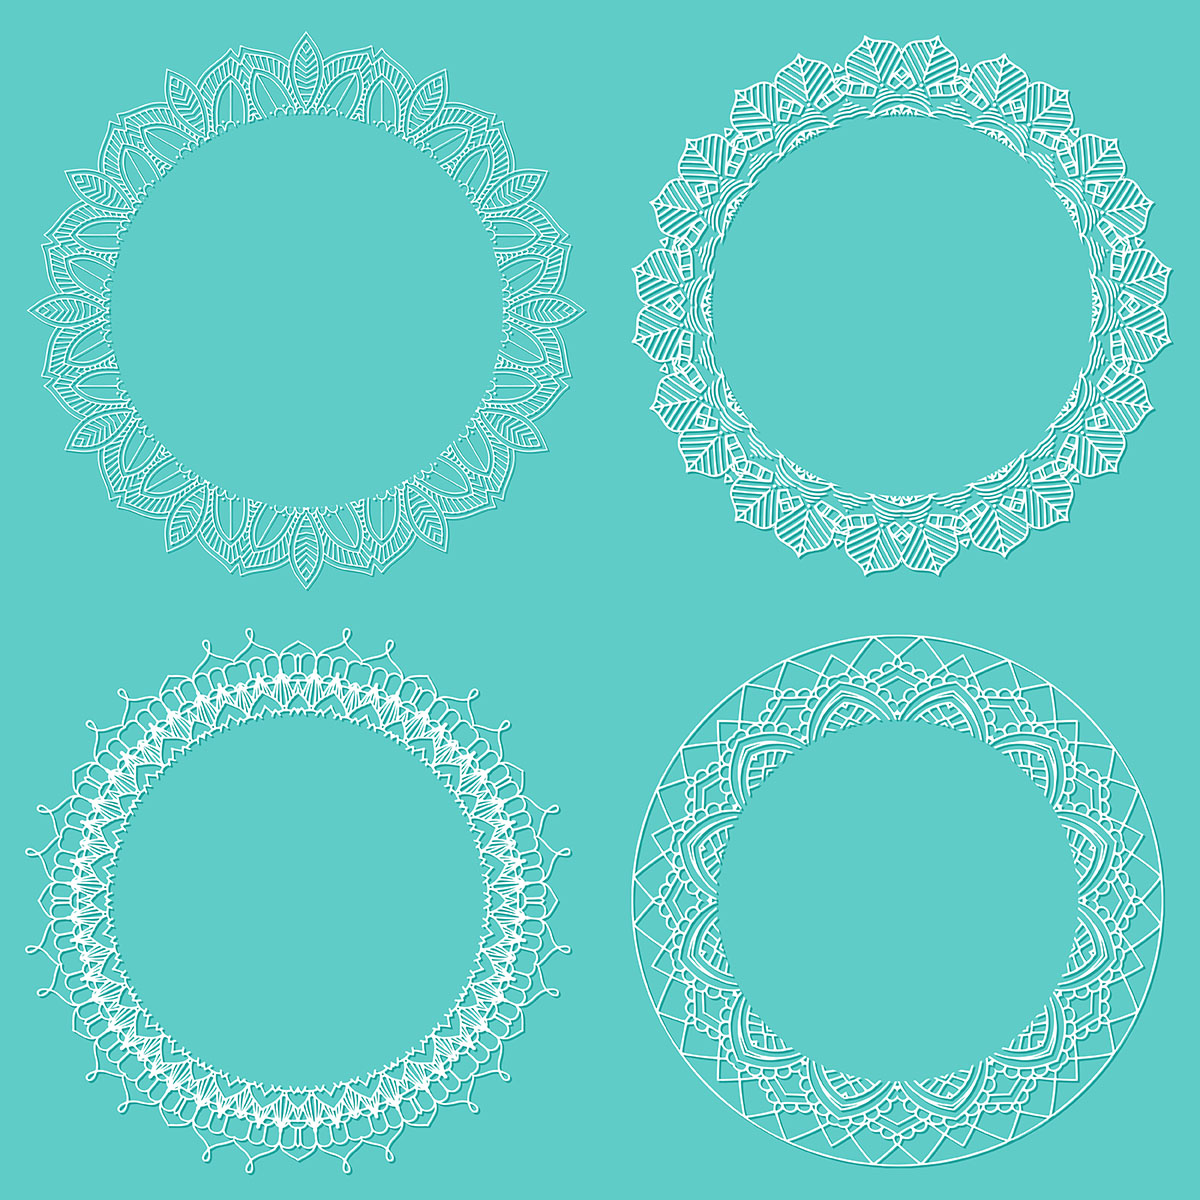 Lace style borders - Download Free Vectors, Clipart ...